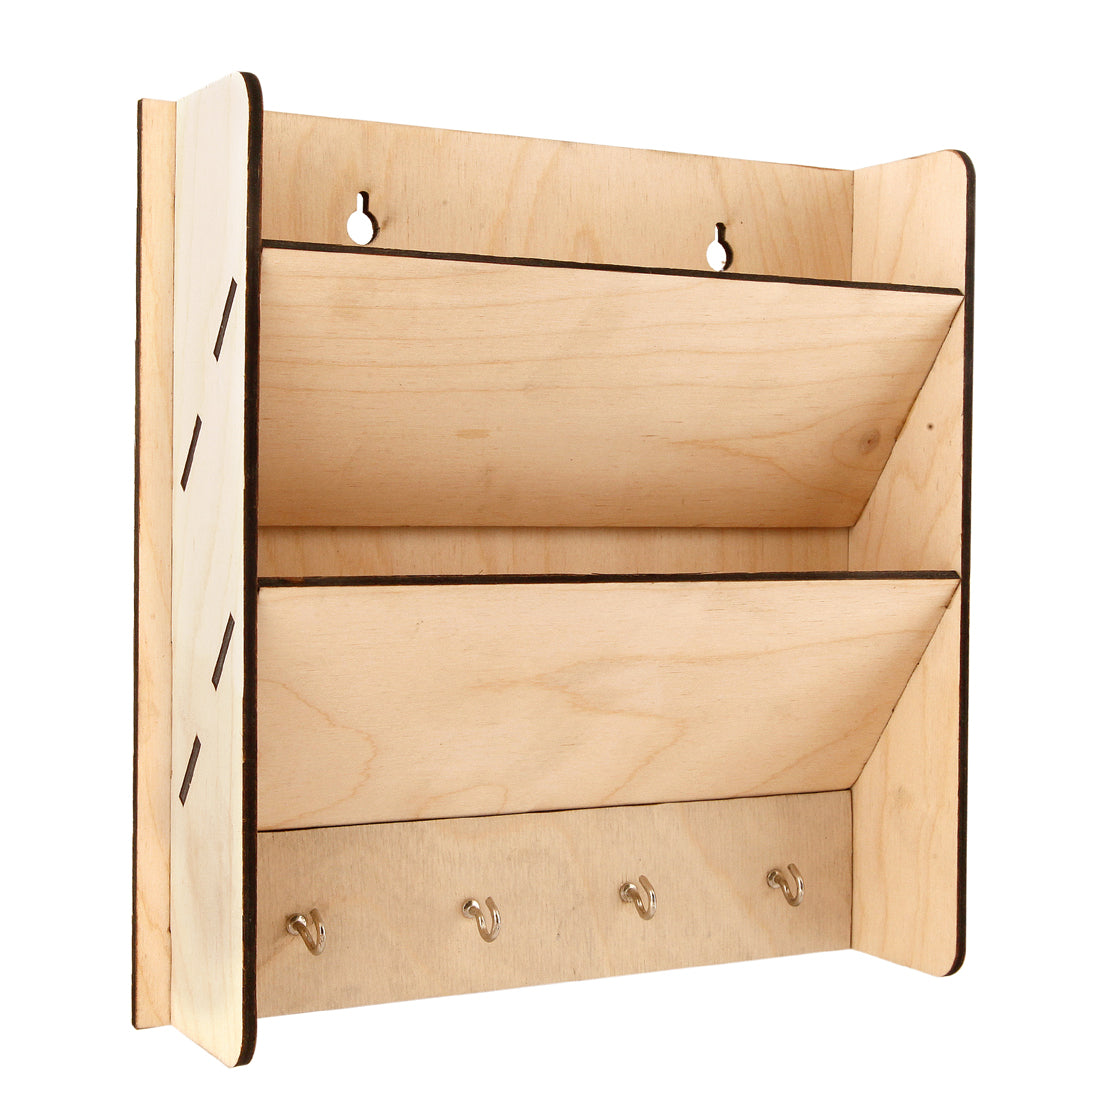 Wooden Mail Box with Key Holder and Storage Box |